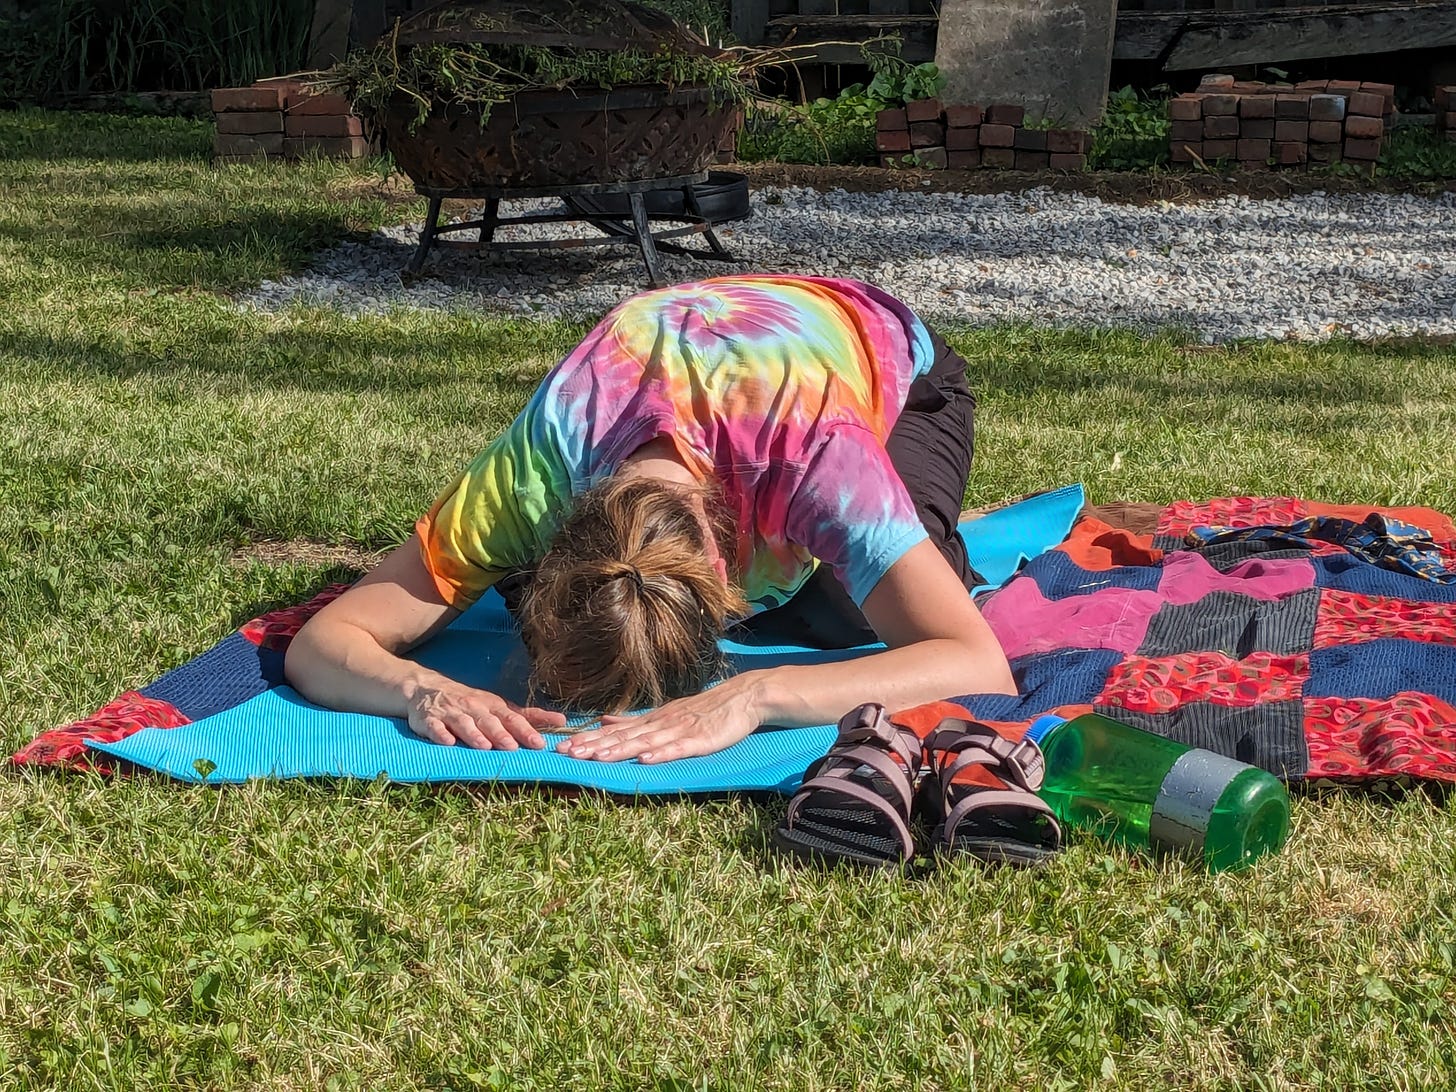 A woman in a tie dye shirt does a child's pose on a yoga mat in a back yard. Her mat is on a quilt, and there are sandals and a water bottle directly in front of the mat.